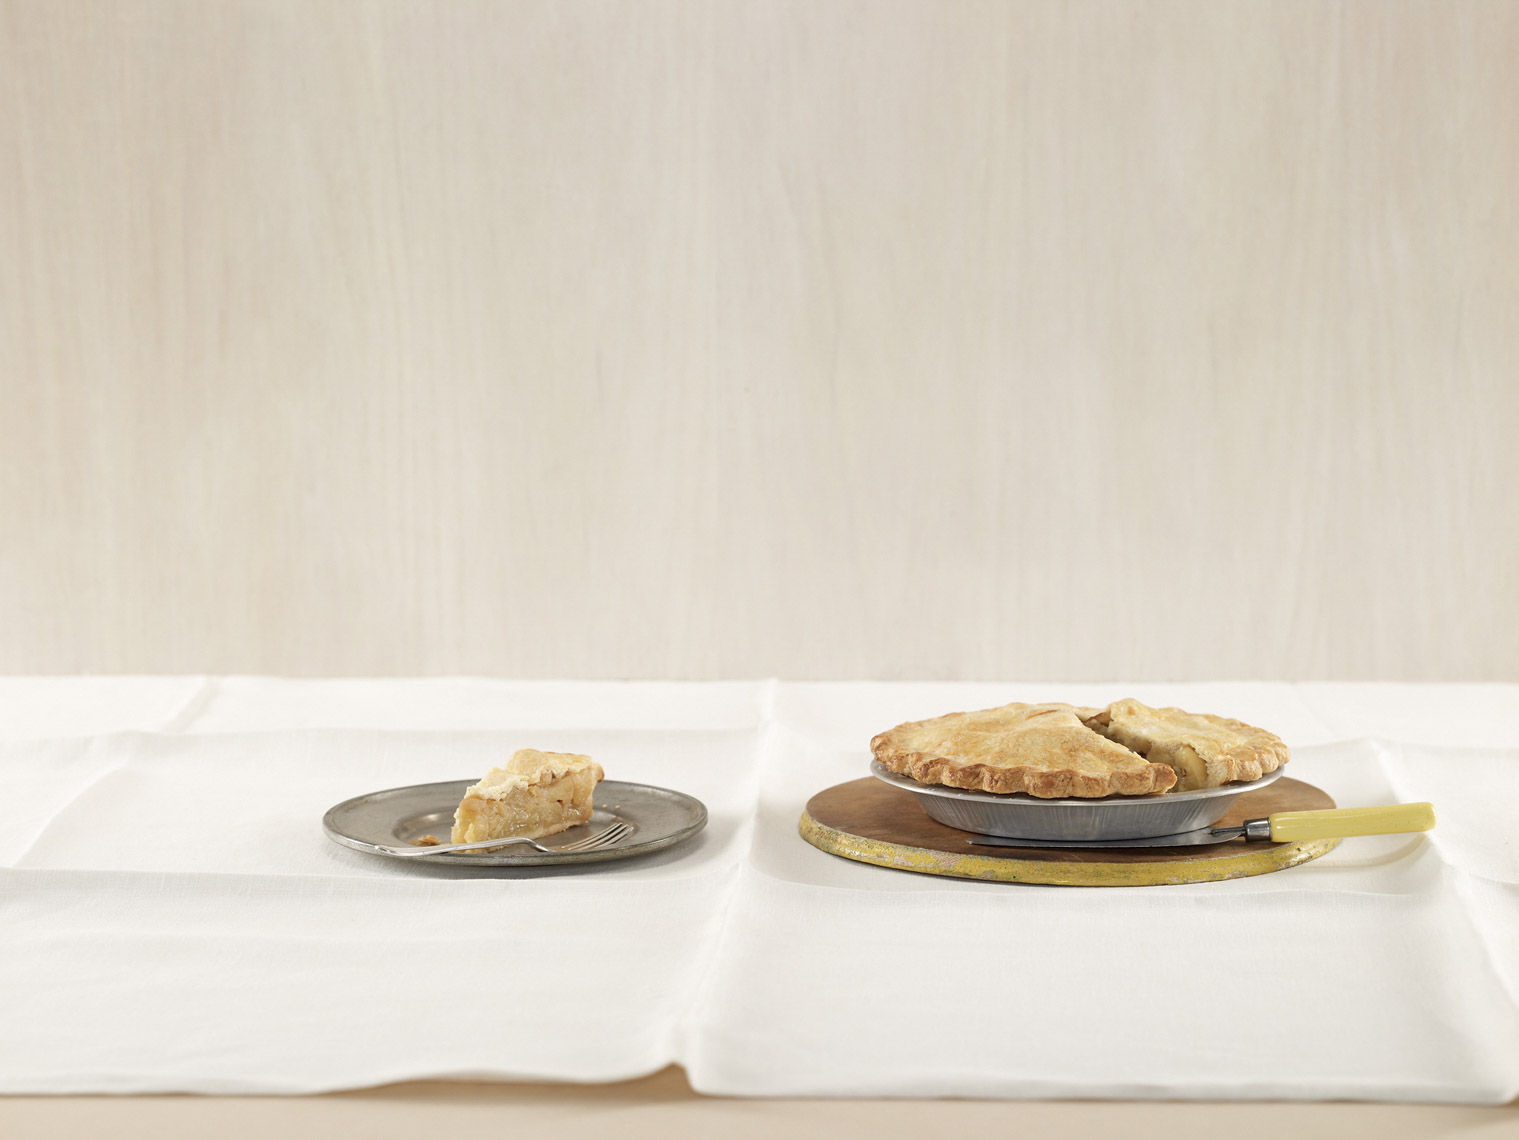 food stylist in San Francisco - Apple pie by Alessandra Mortola prop stylist, photographed by Laurie Frankel